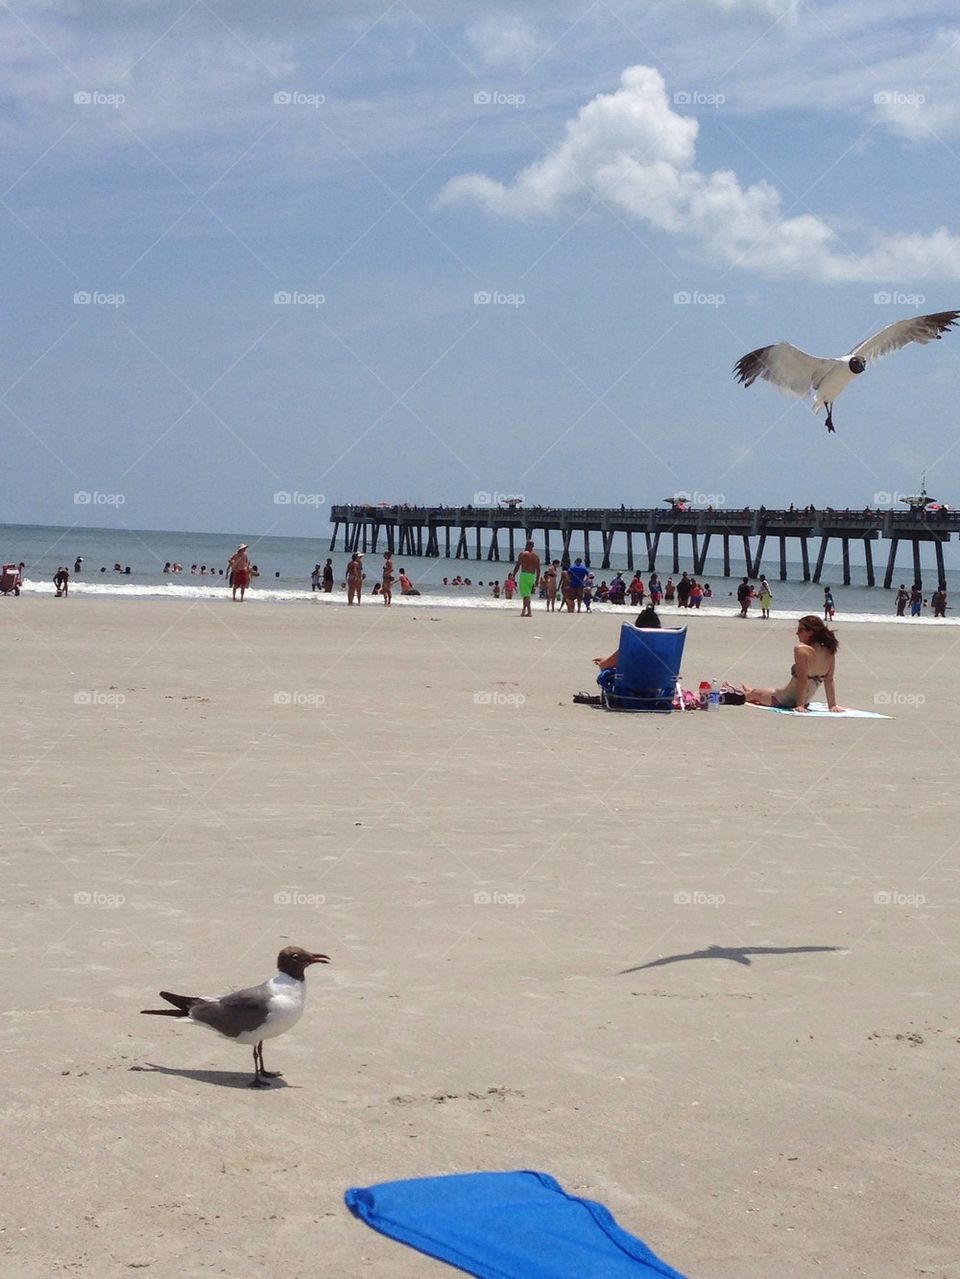 Seagulls Search for Food at Jacksonville Beach